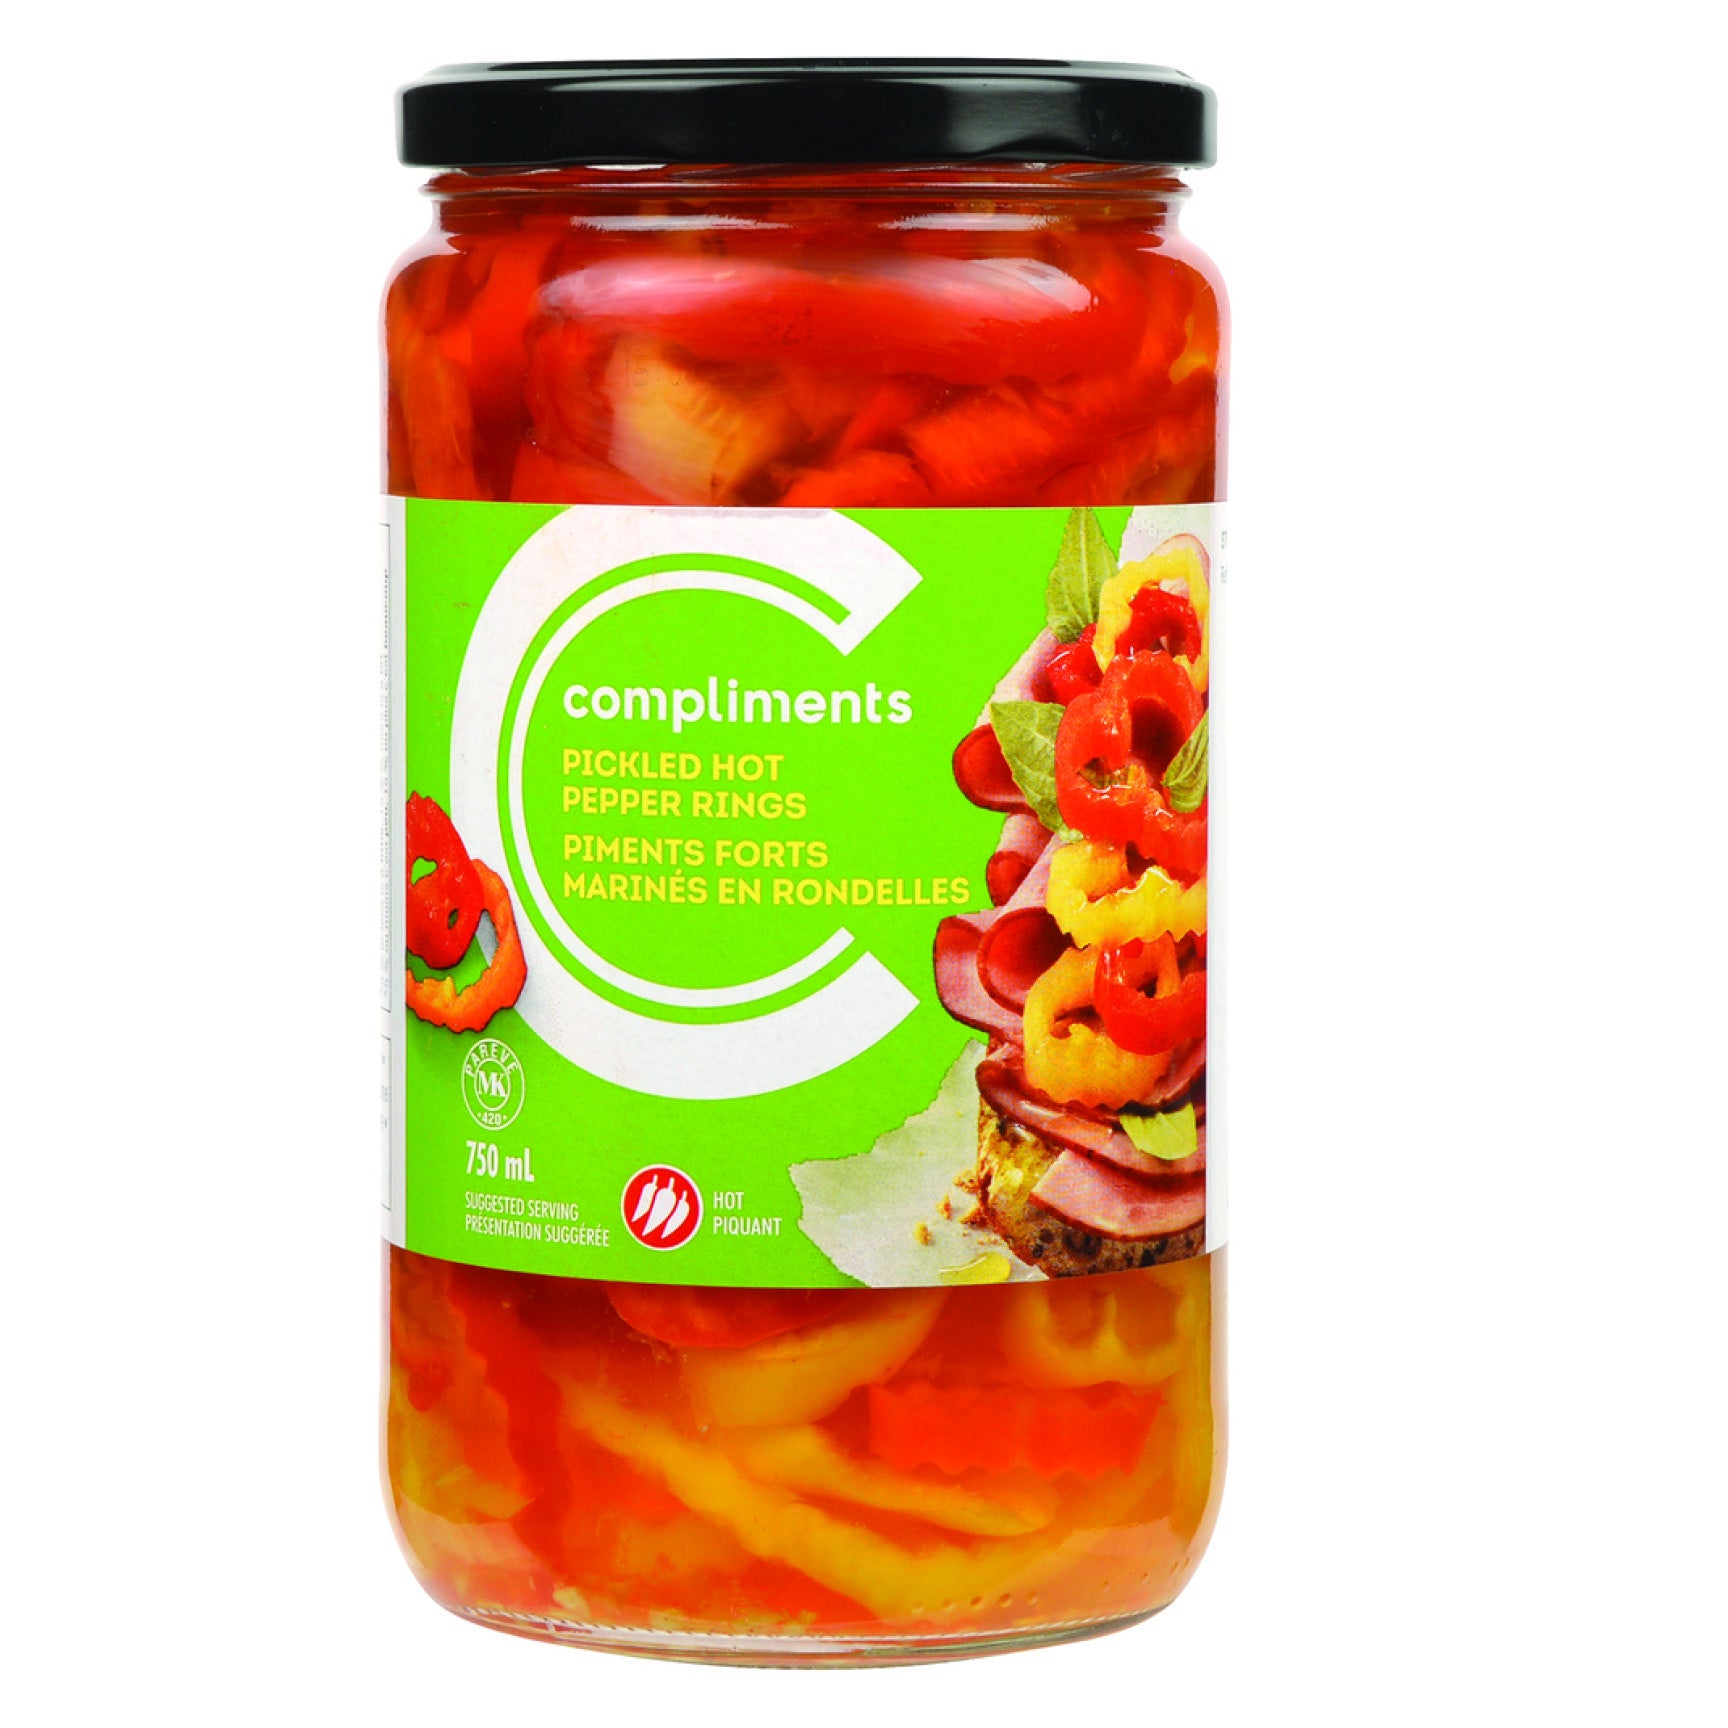 Compliments Hot Pepper Rings Pickled, 750ml